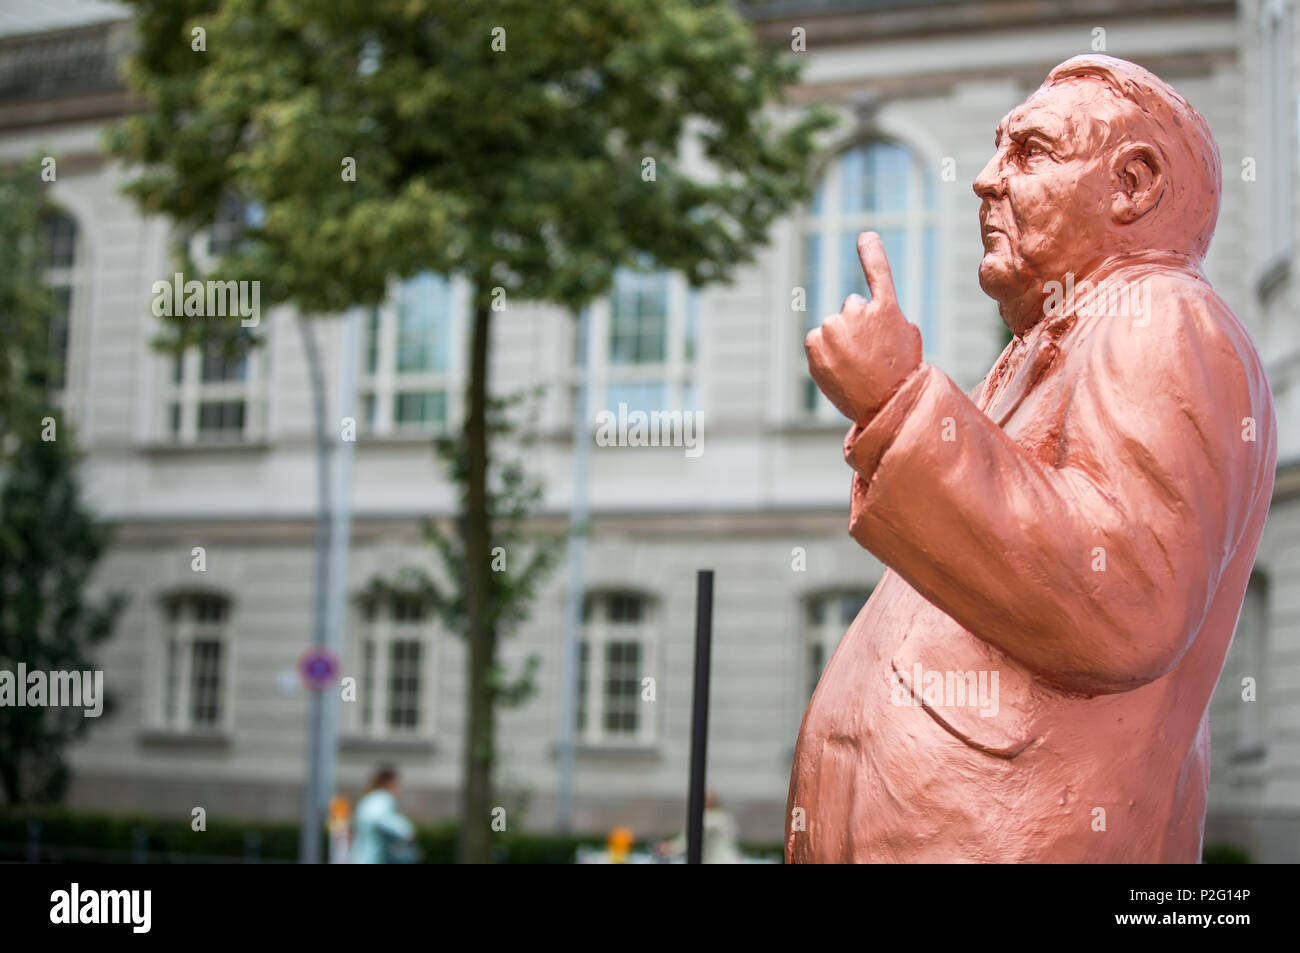 15 June 2018, Germany, Berlin: The New Social Market Economy initiative ('Neue Soziale Marktwirtschaft') displaying a statue of Ludwig Erhard, the father of the 'German Economic Miracle' and of the social market economy, before Germany's Ministry of Economy. The ceremony on the 70th anniversary of economic and monetary reforms in Germany took place in the Ministry. Photo: Jens Büttner/dpa-Zentralbild/dpa Credit: dpa picture alliance/Alamy Live News Stock Photo